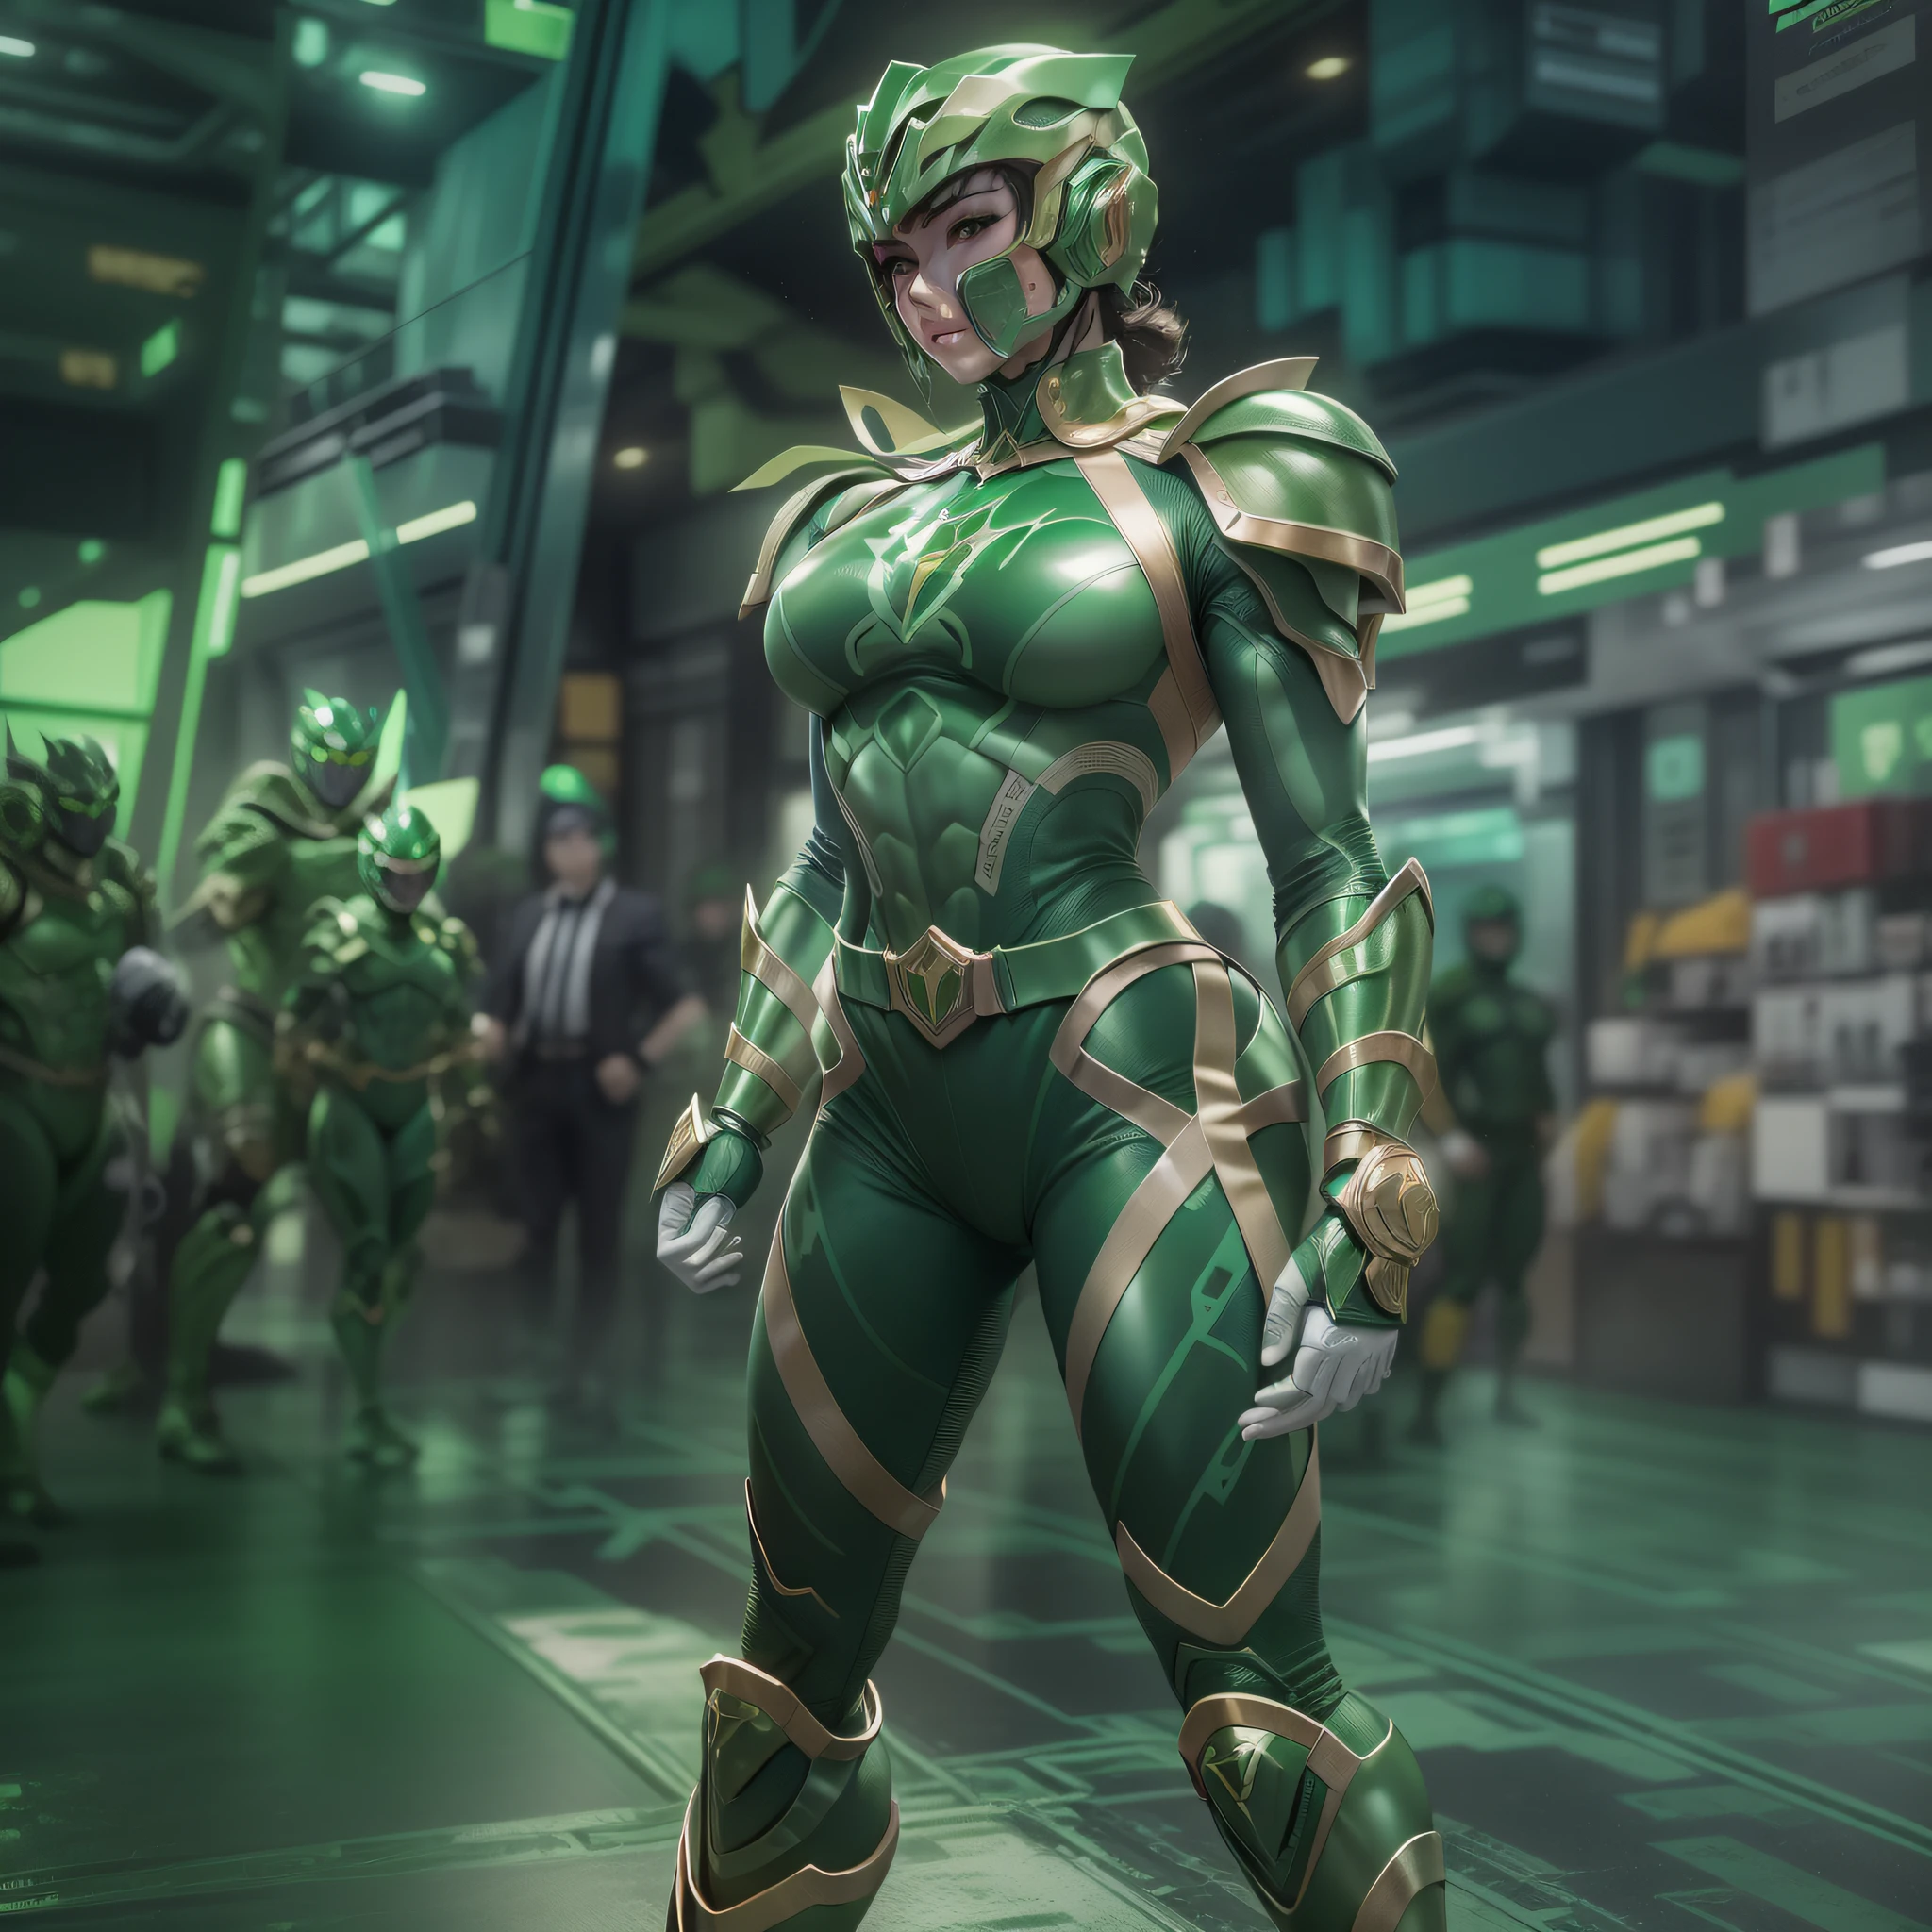 a close up of a muscle beautifull girl in a green power ranger costume, green power ranger, green legs, metallic green armor, wearing green battle armor, green armor, power ranger, zoomed out full body, green body, full body close-up shot, zoomed out shot, in a space hero outfit, ranger, full uniform, tokusatsu